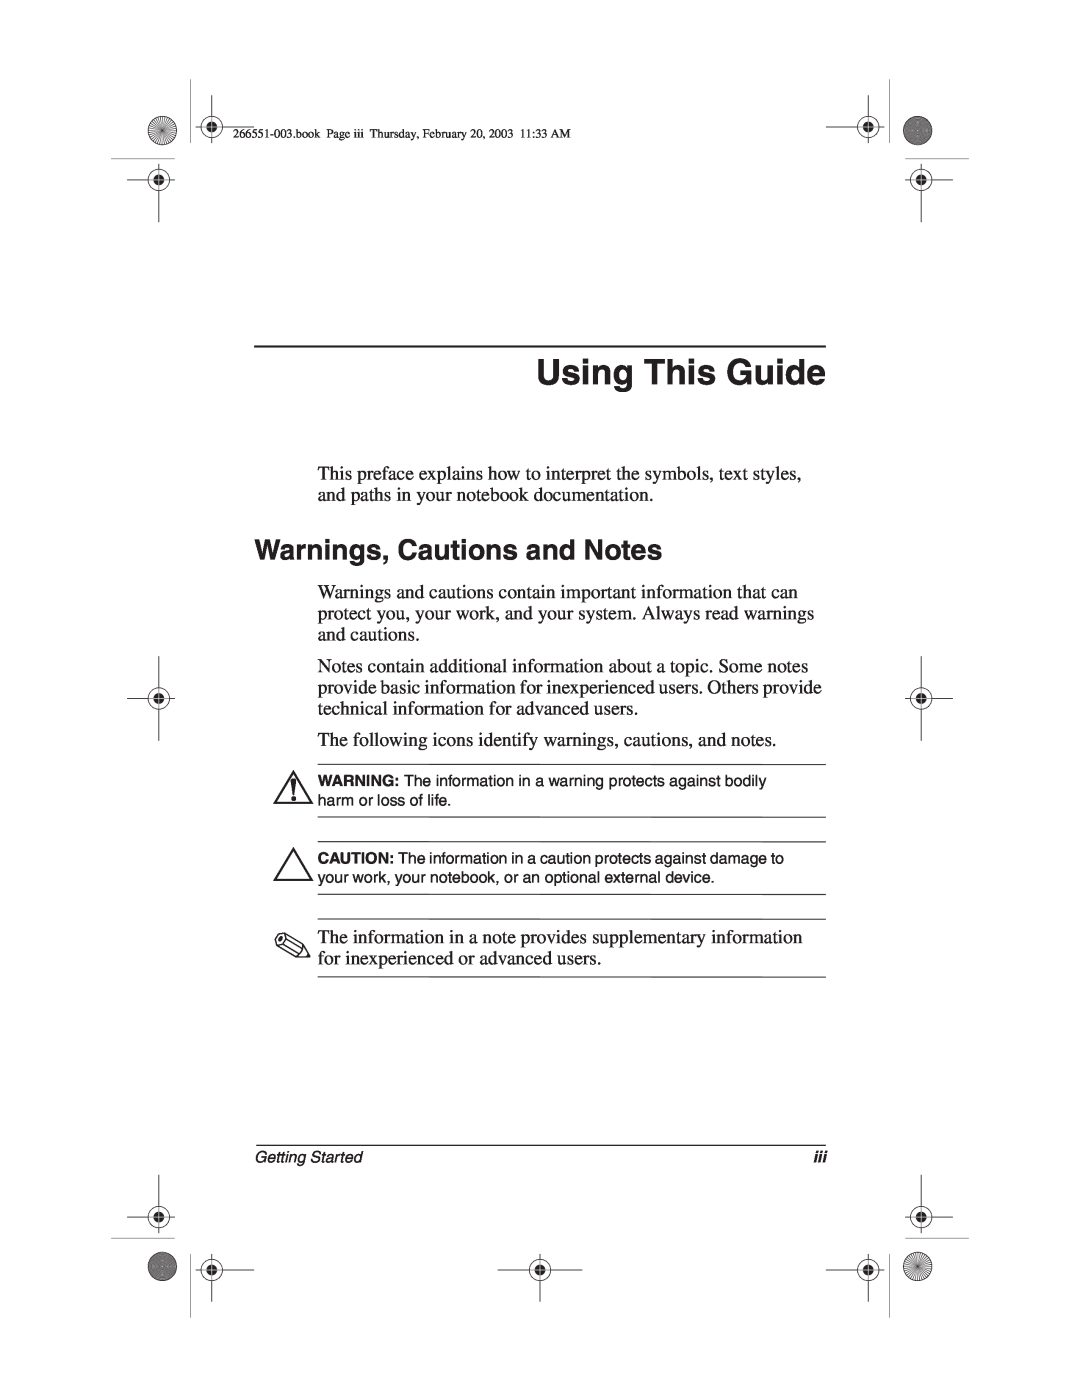 HP 2895AP, 2899AP, 2897AP, 2898AP, 2892AP, 2893AP, 2891AP, 2894AP, 2889AP, 2887AP Using This Guide, Warnings, Cautions and Notes 